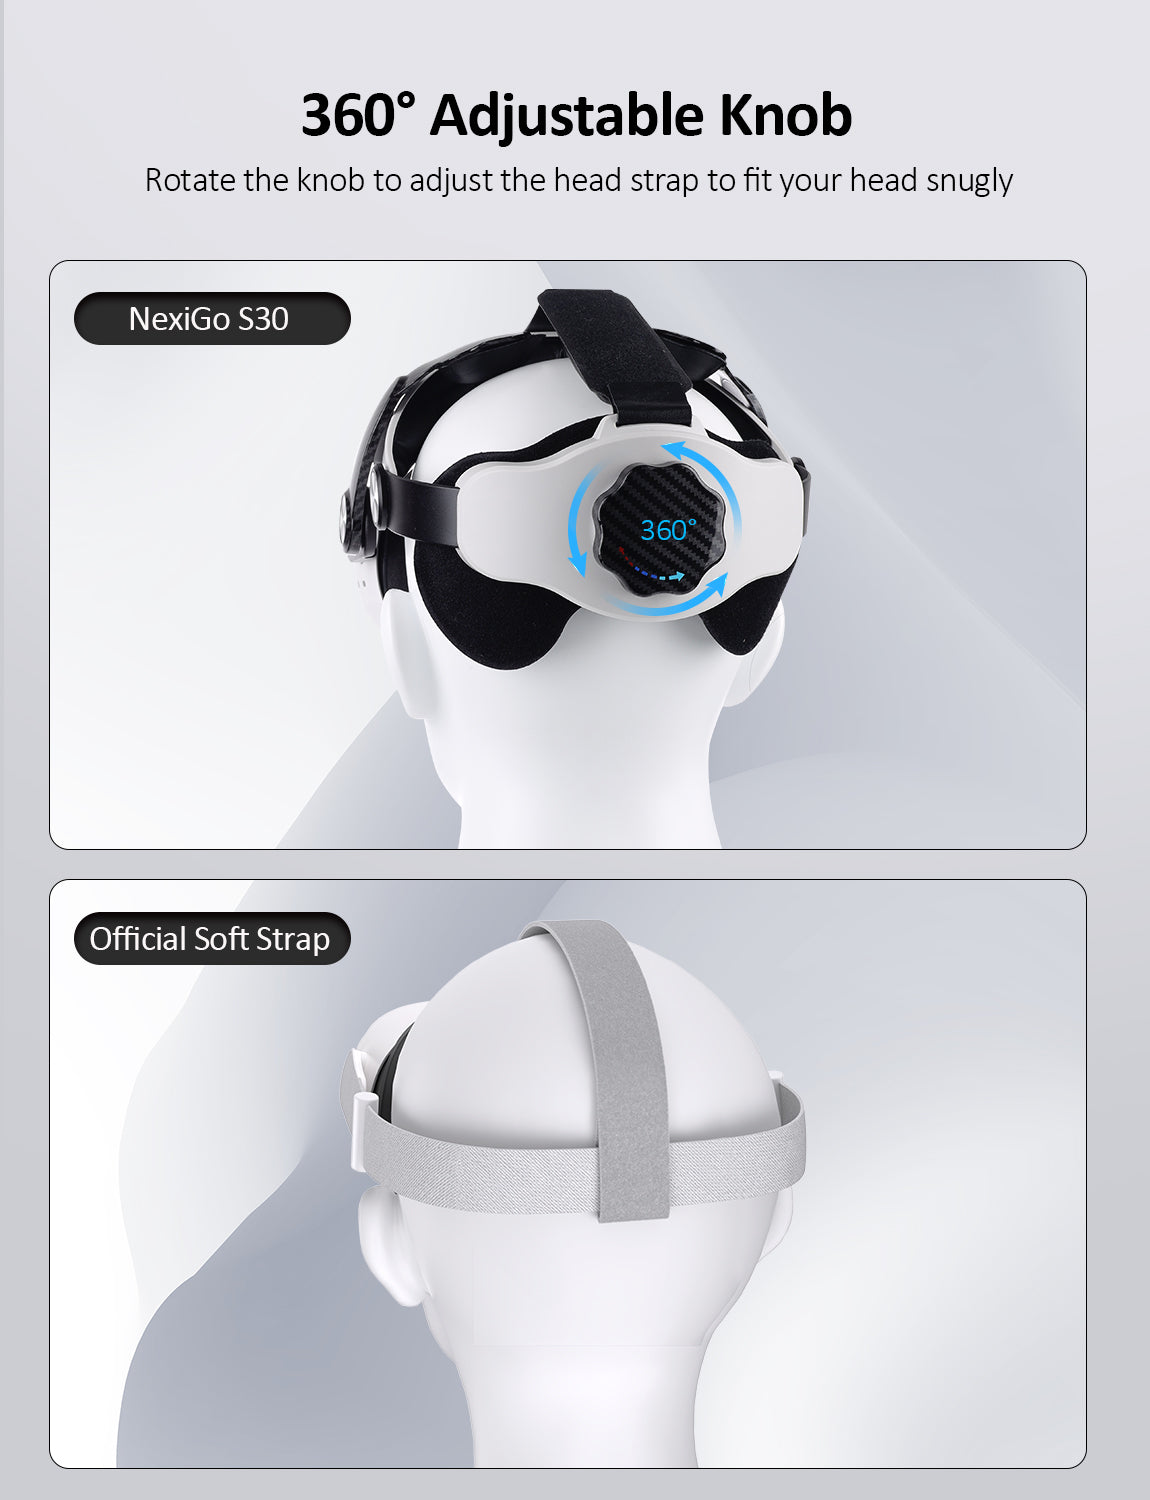 The NexiGo S30 is designed with an adjustable knob to fit your head snugly.